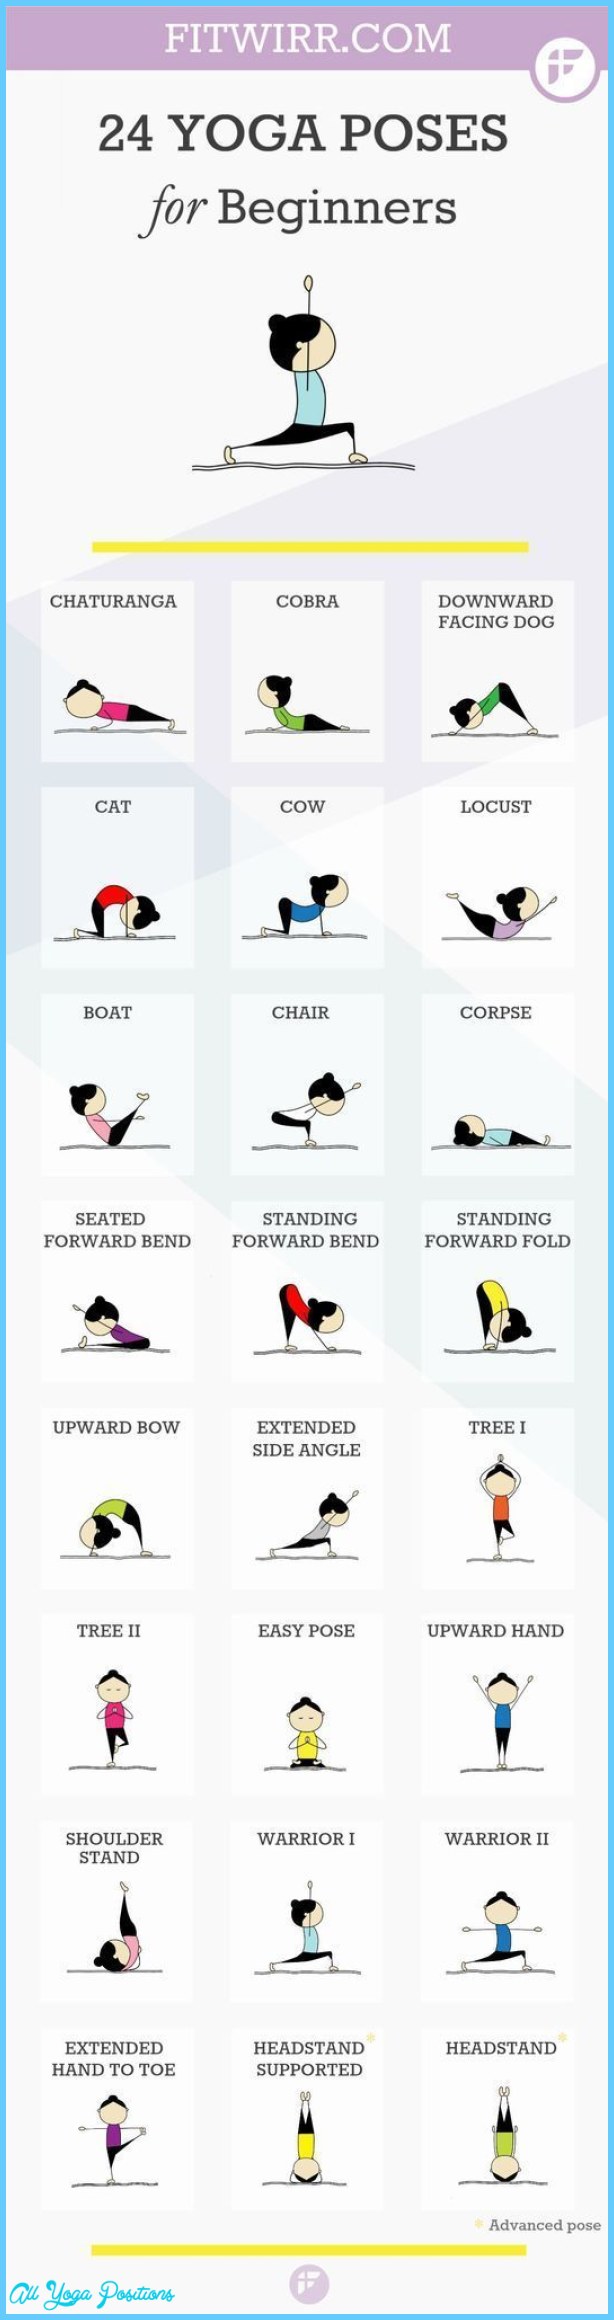 beginners-yoga-poses-chart-allyogapositions